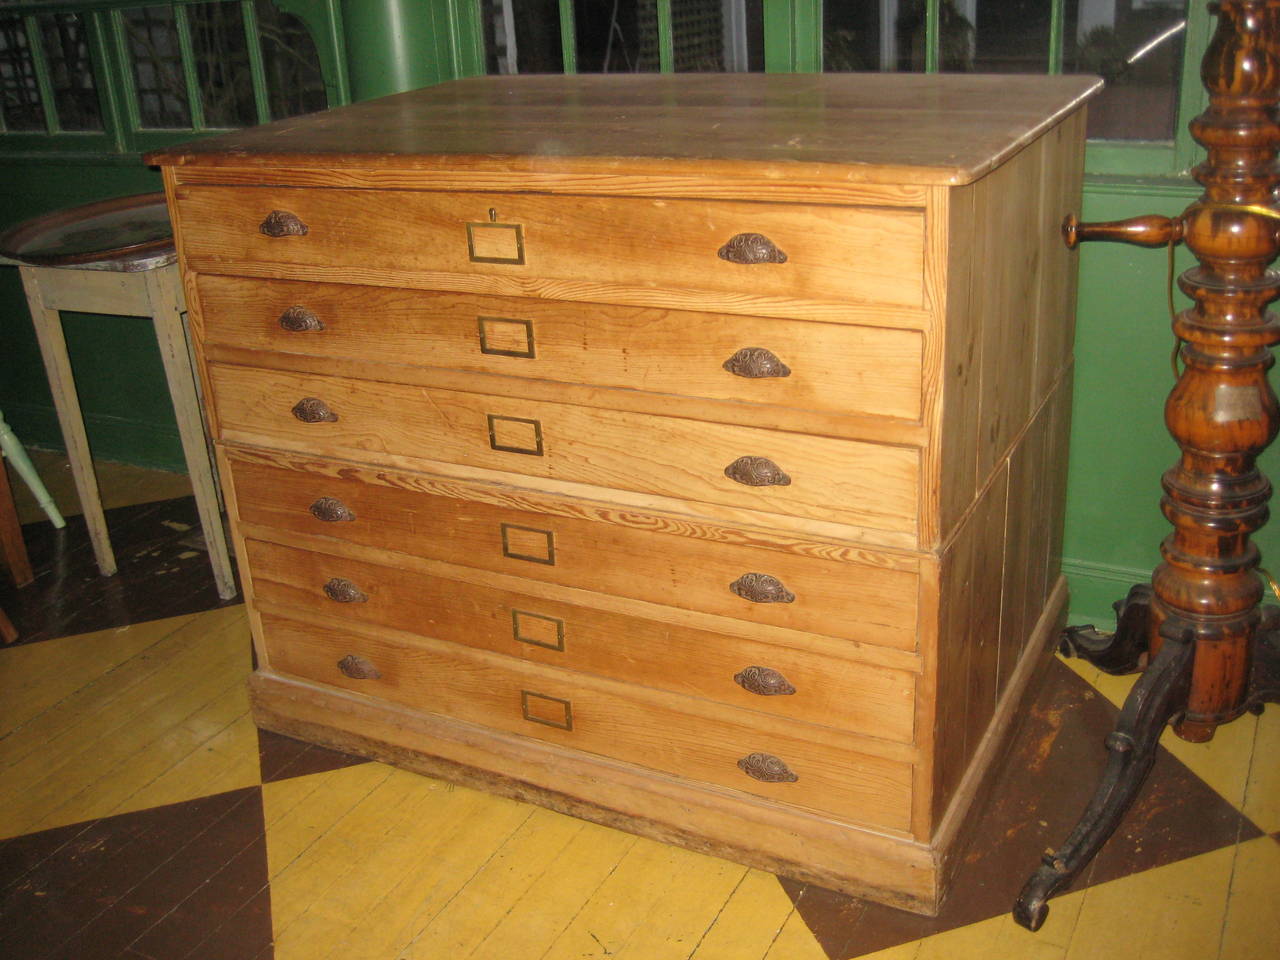 English pine chest of drawers for architectural plans and maps.